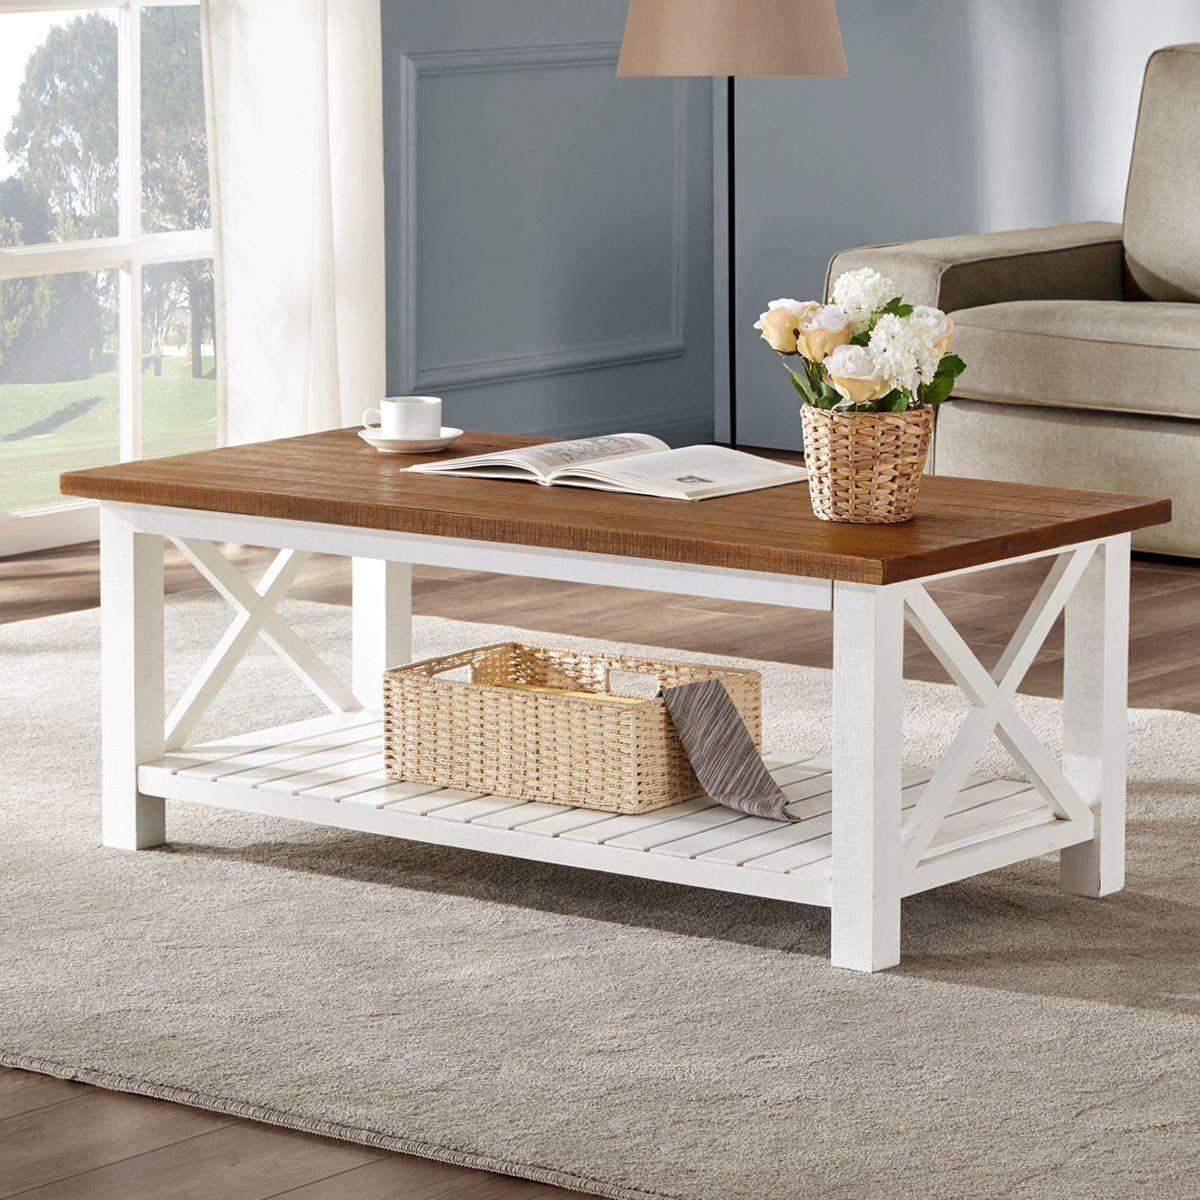 The 10 Best Farmhouse Coffee Tables (for Any Budget) For Living Room Farmhouse Coffee Tables (View 2 of 15)